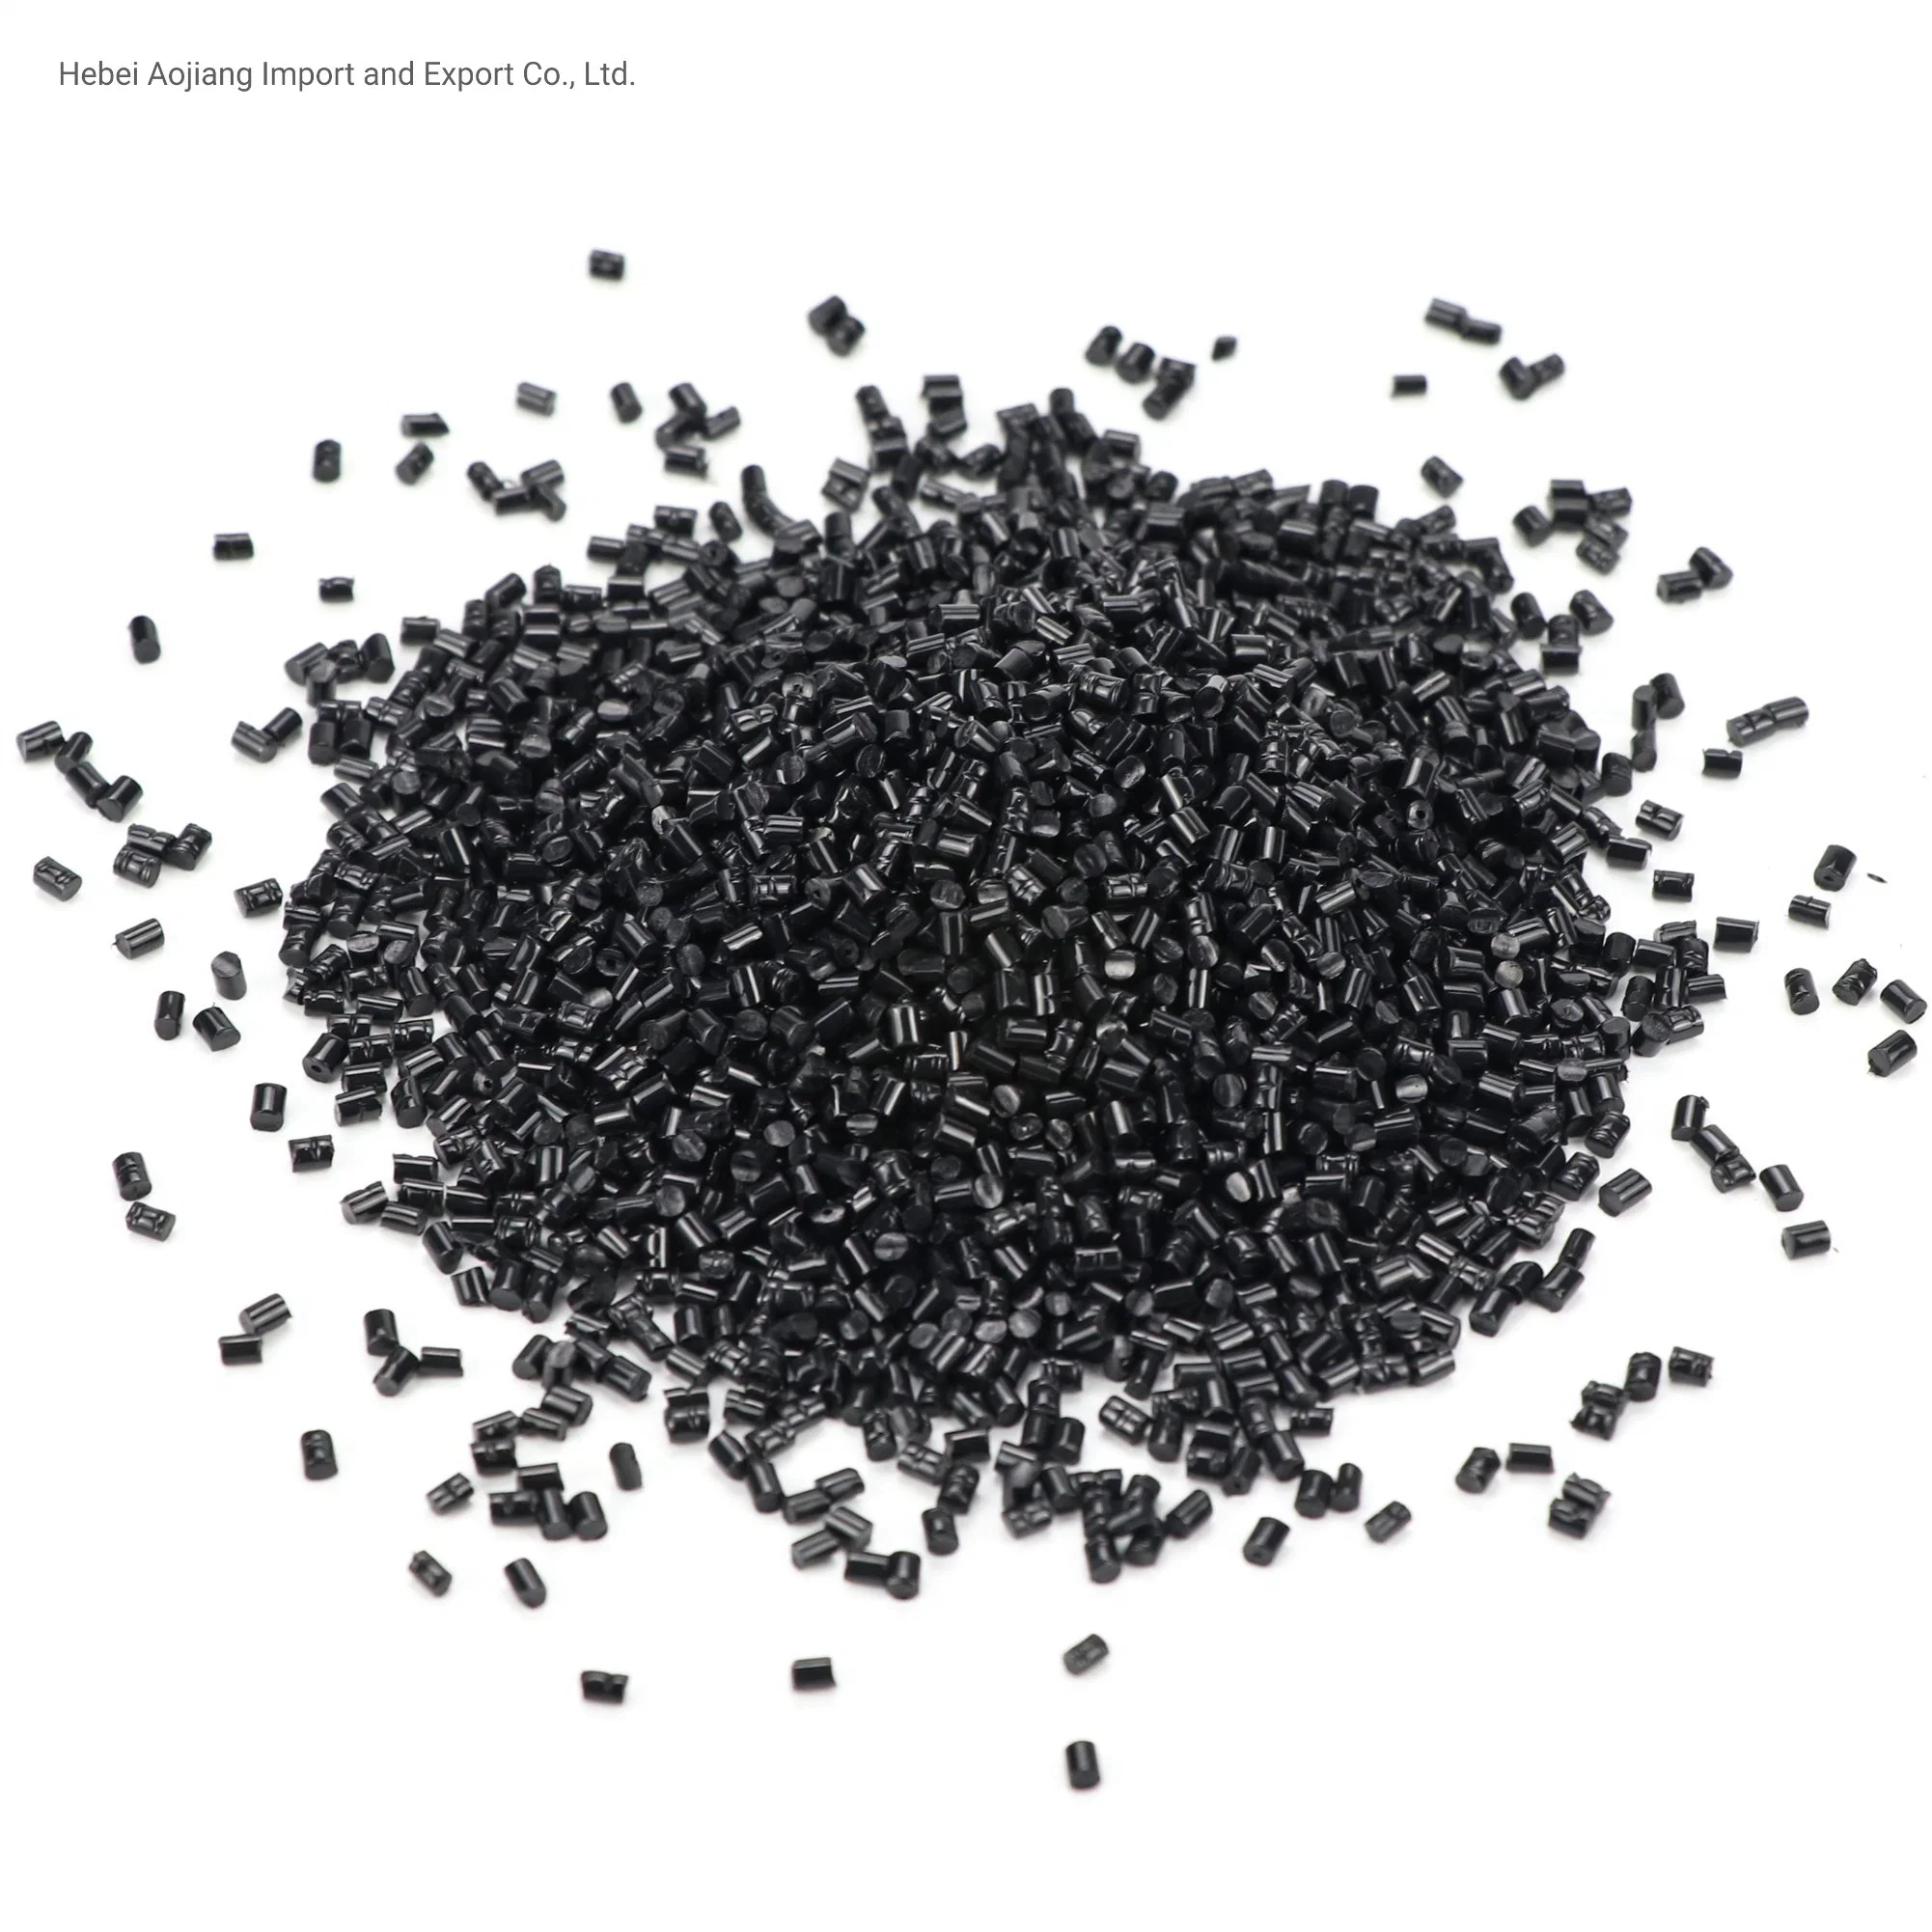 HDPE Granules HDPE Resin Virgin Recycled Good Melit Strength HDPE for Blown Film Extrusion Application